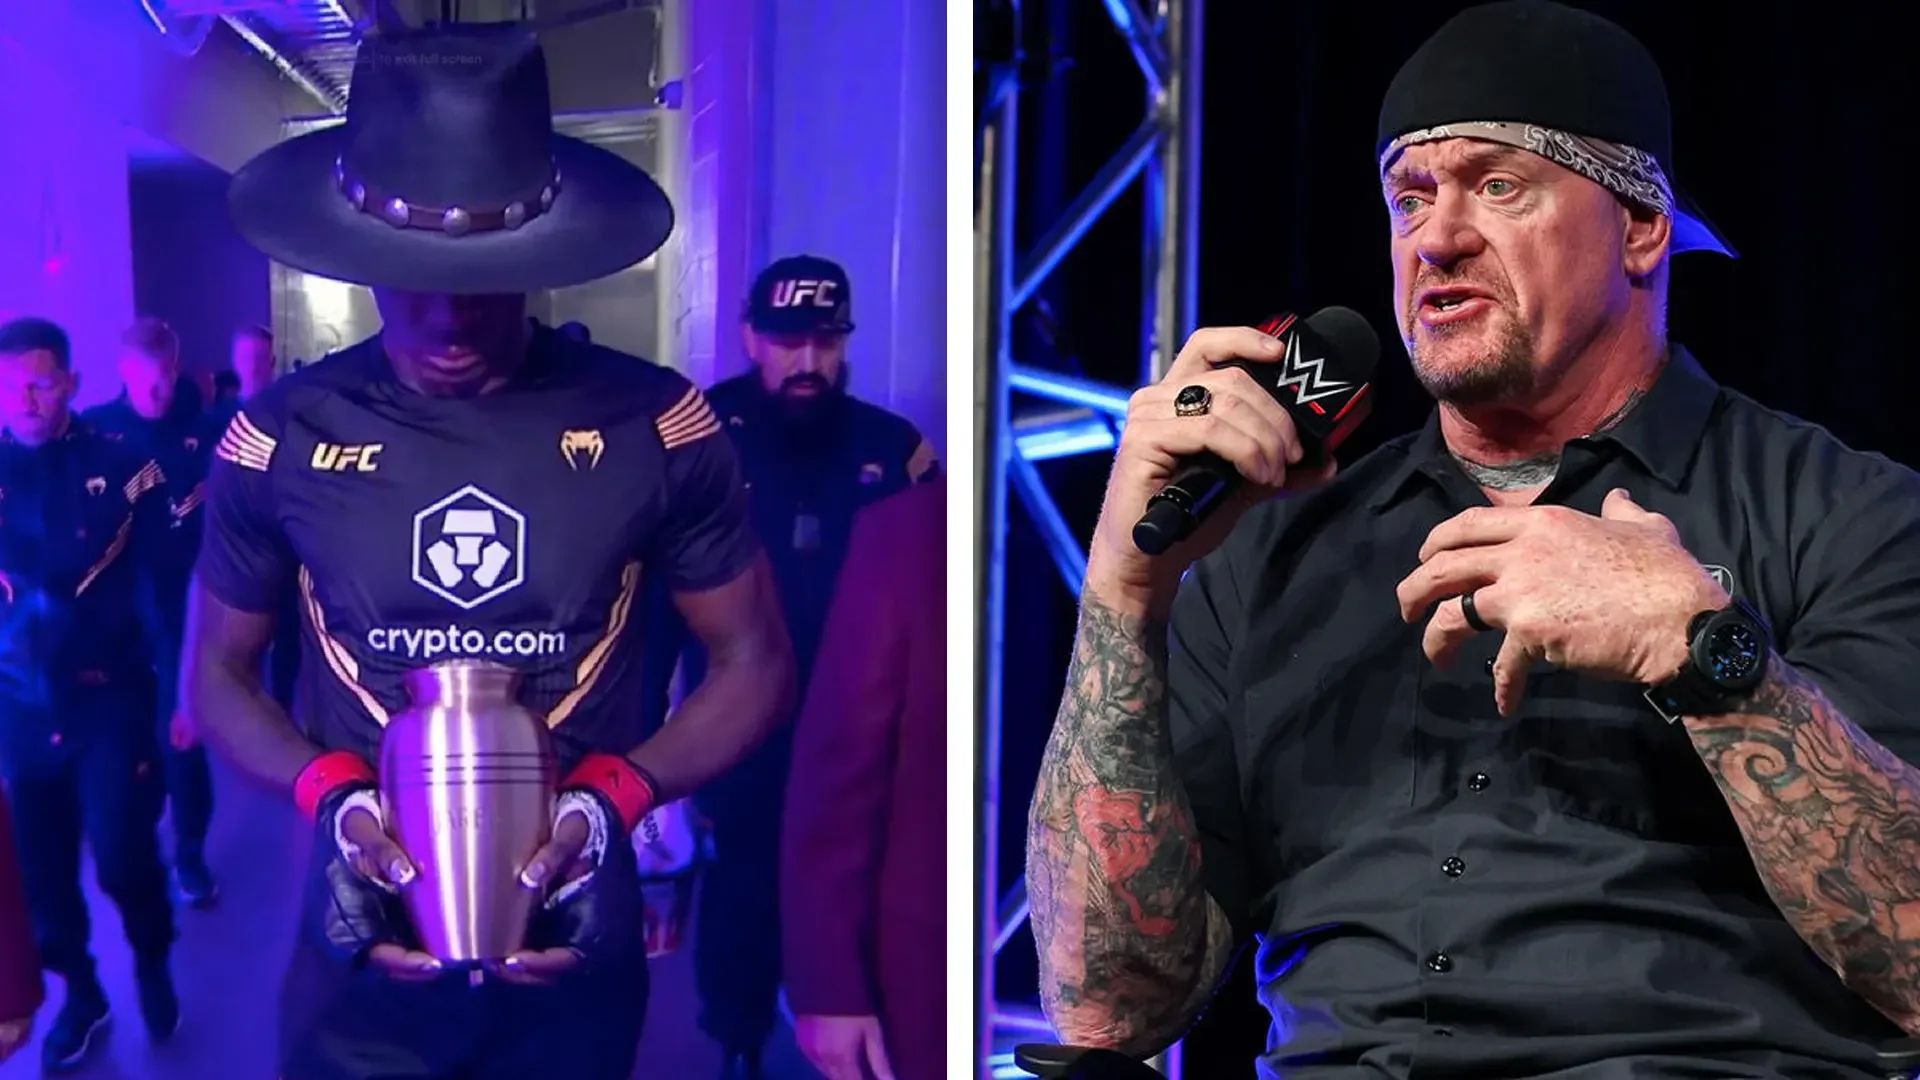 The Undertaker Comments On Israel Adesanyas UFC 276 Entrance